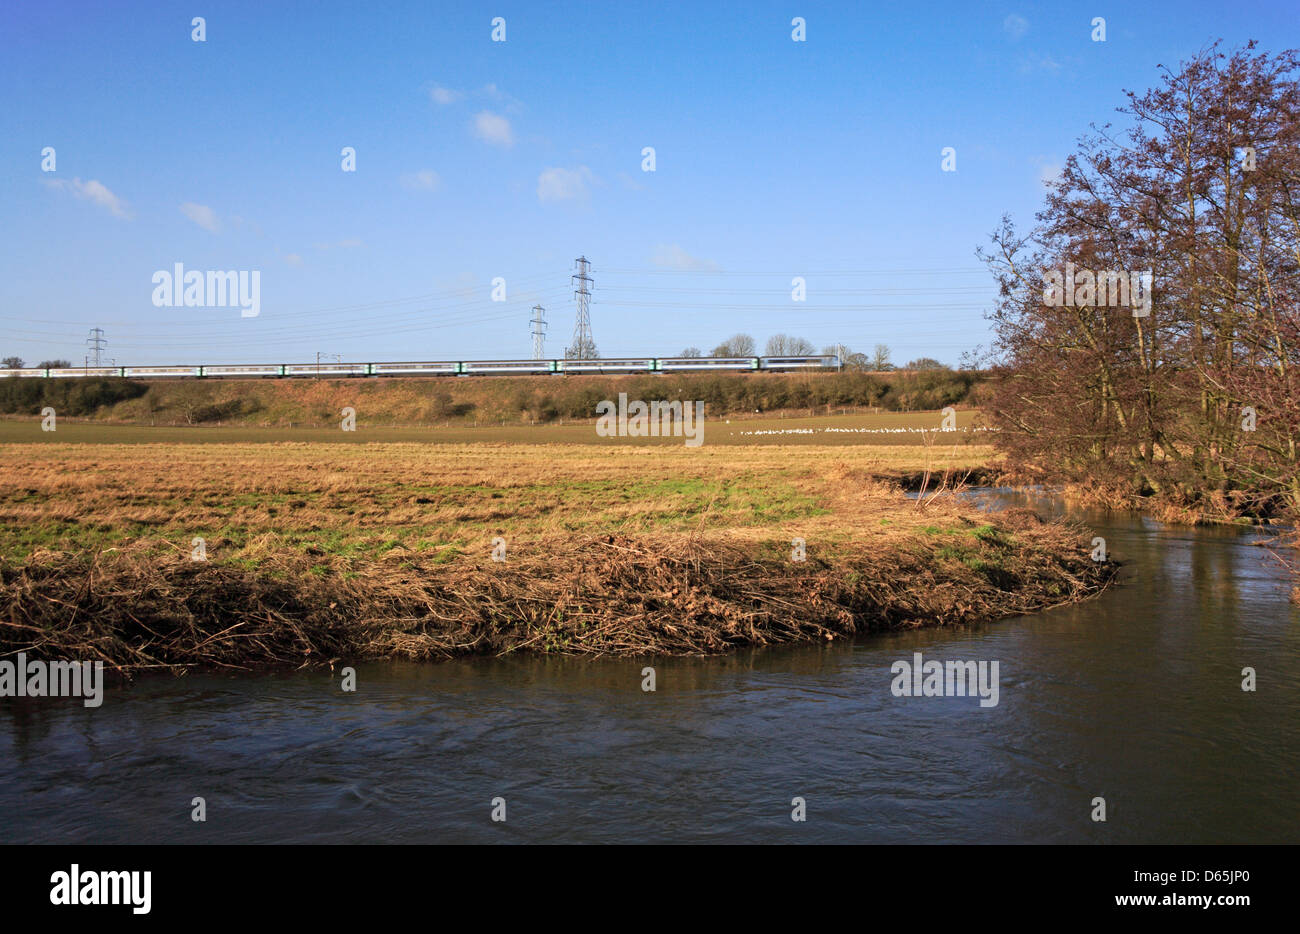 A view of the River Tas with Intercity train approaching Norwich at Caistor St Edmund, Norfolk, England, United Kingdom. Stock Photo